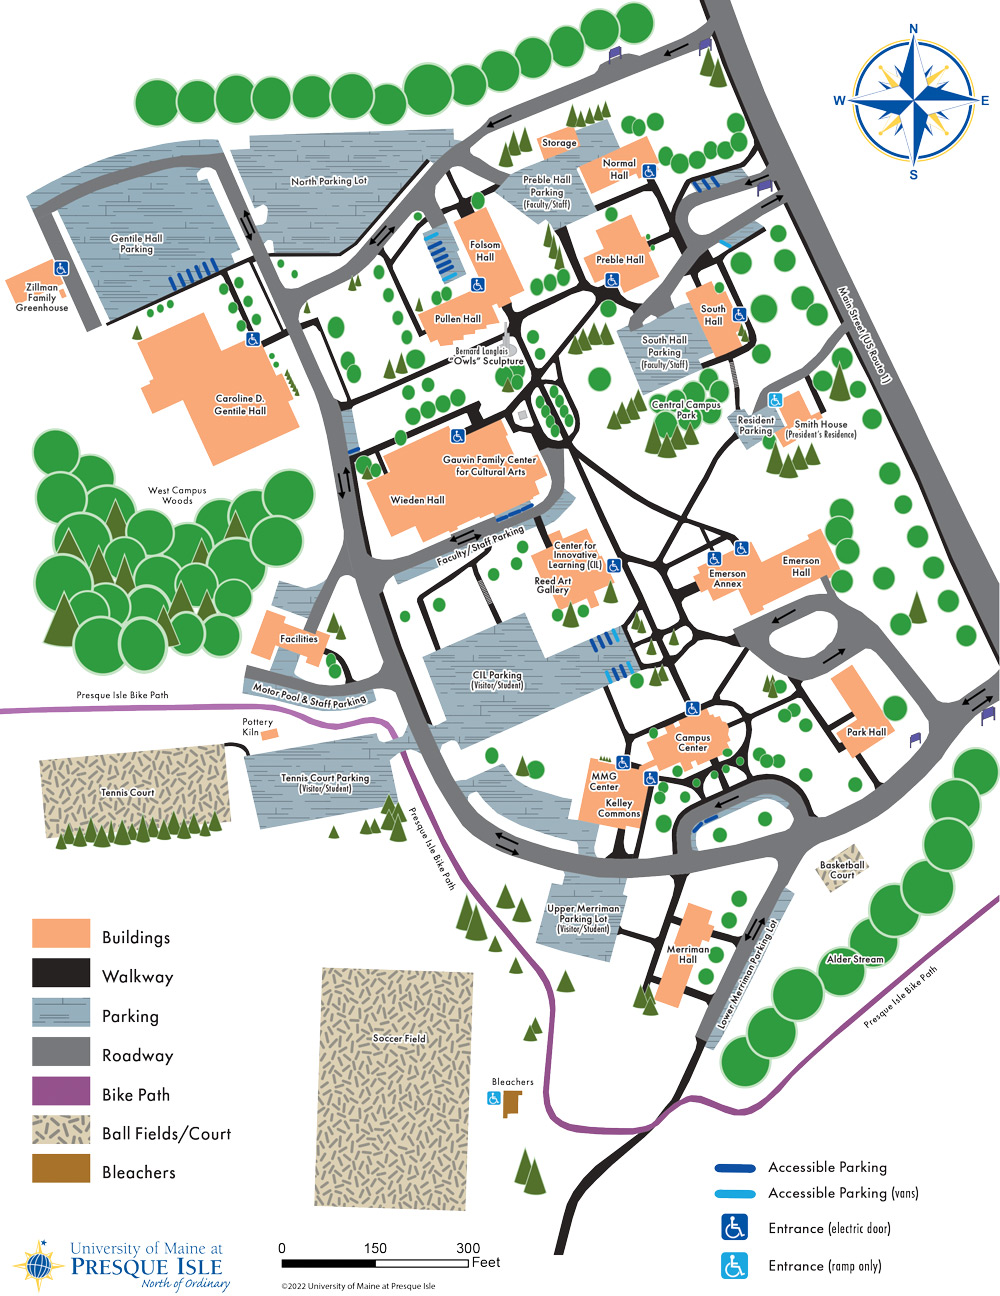 A map of campus showing locations of buildings, parking lots, walking paths, and handicap accessible entrances. See link above for a list of buildings and addresses. 